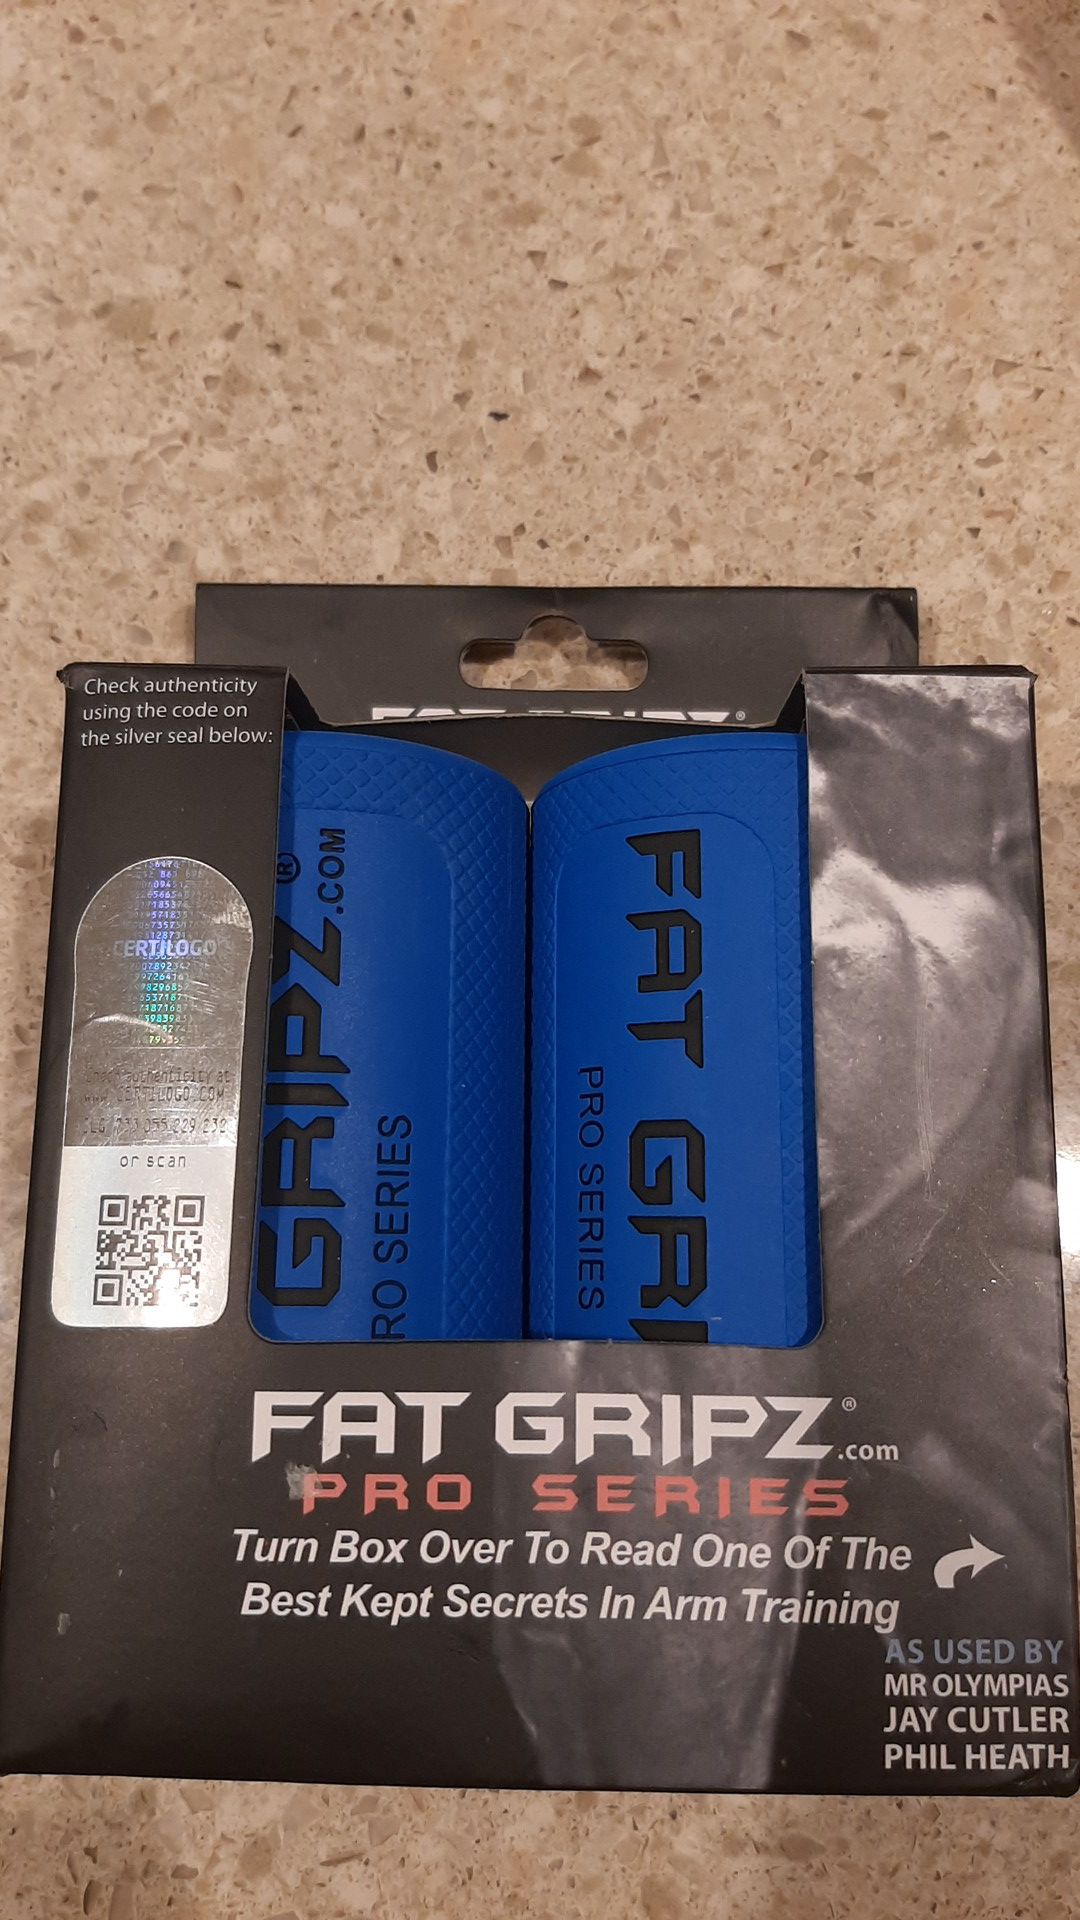 Fat gripz pro series The Simple Proven Way To Get B2ig Biceps And Forearms Fast (At Home Or In The Gym)